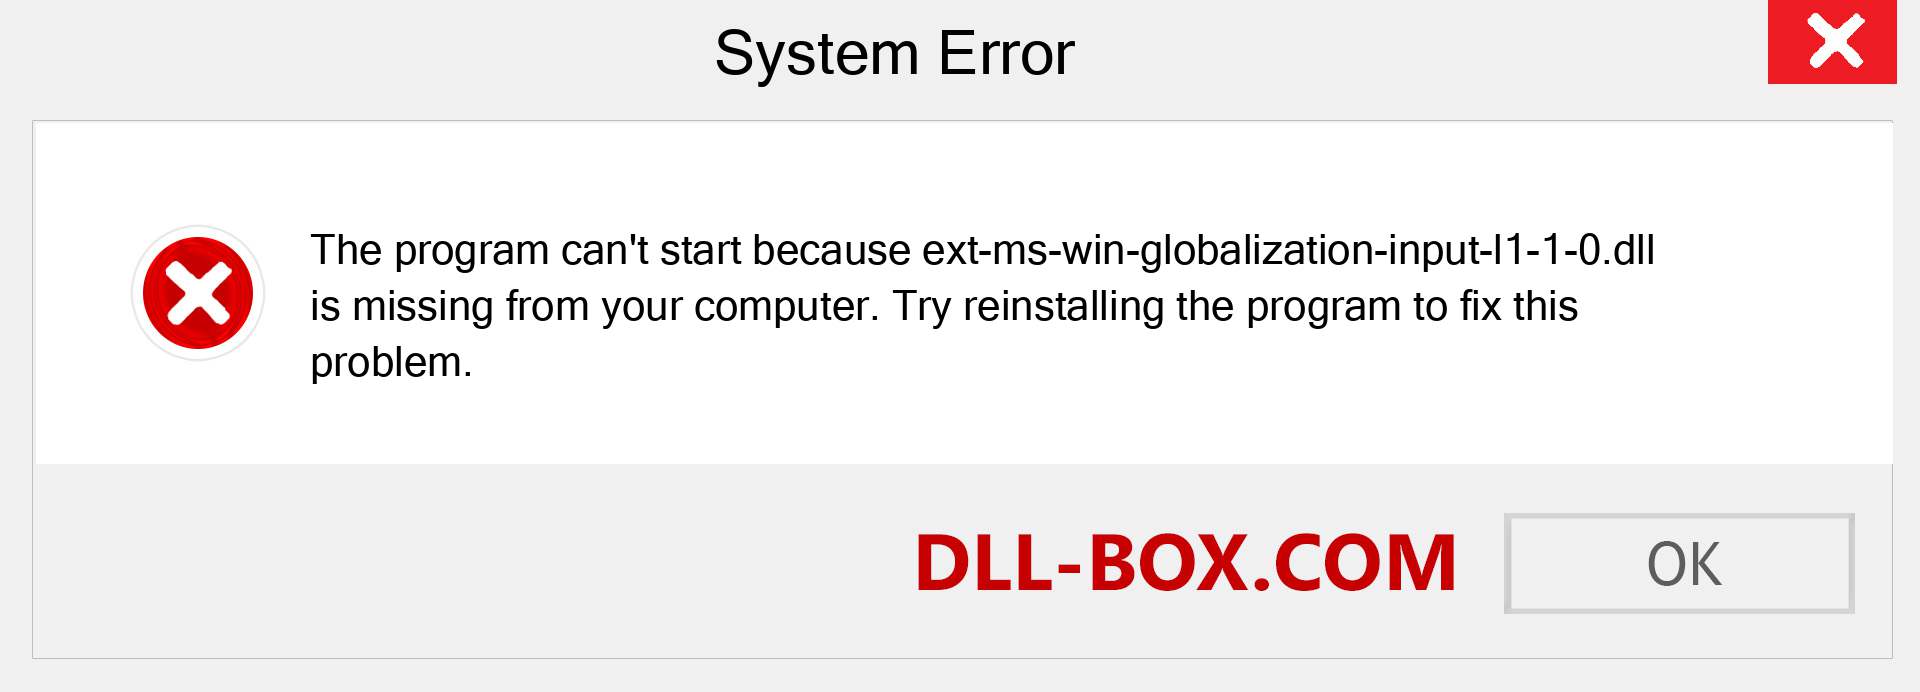  ext-ms-win-globalization-input-l1-1-0.dll file is missing?. Download for Windows 7, 8, 10 - Fix  ext-ms-win-globalization-input-l1-1-0 dll Missing Error on Windows, photos, images